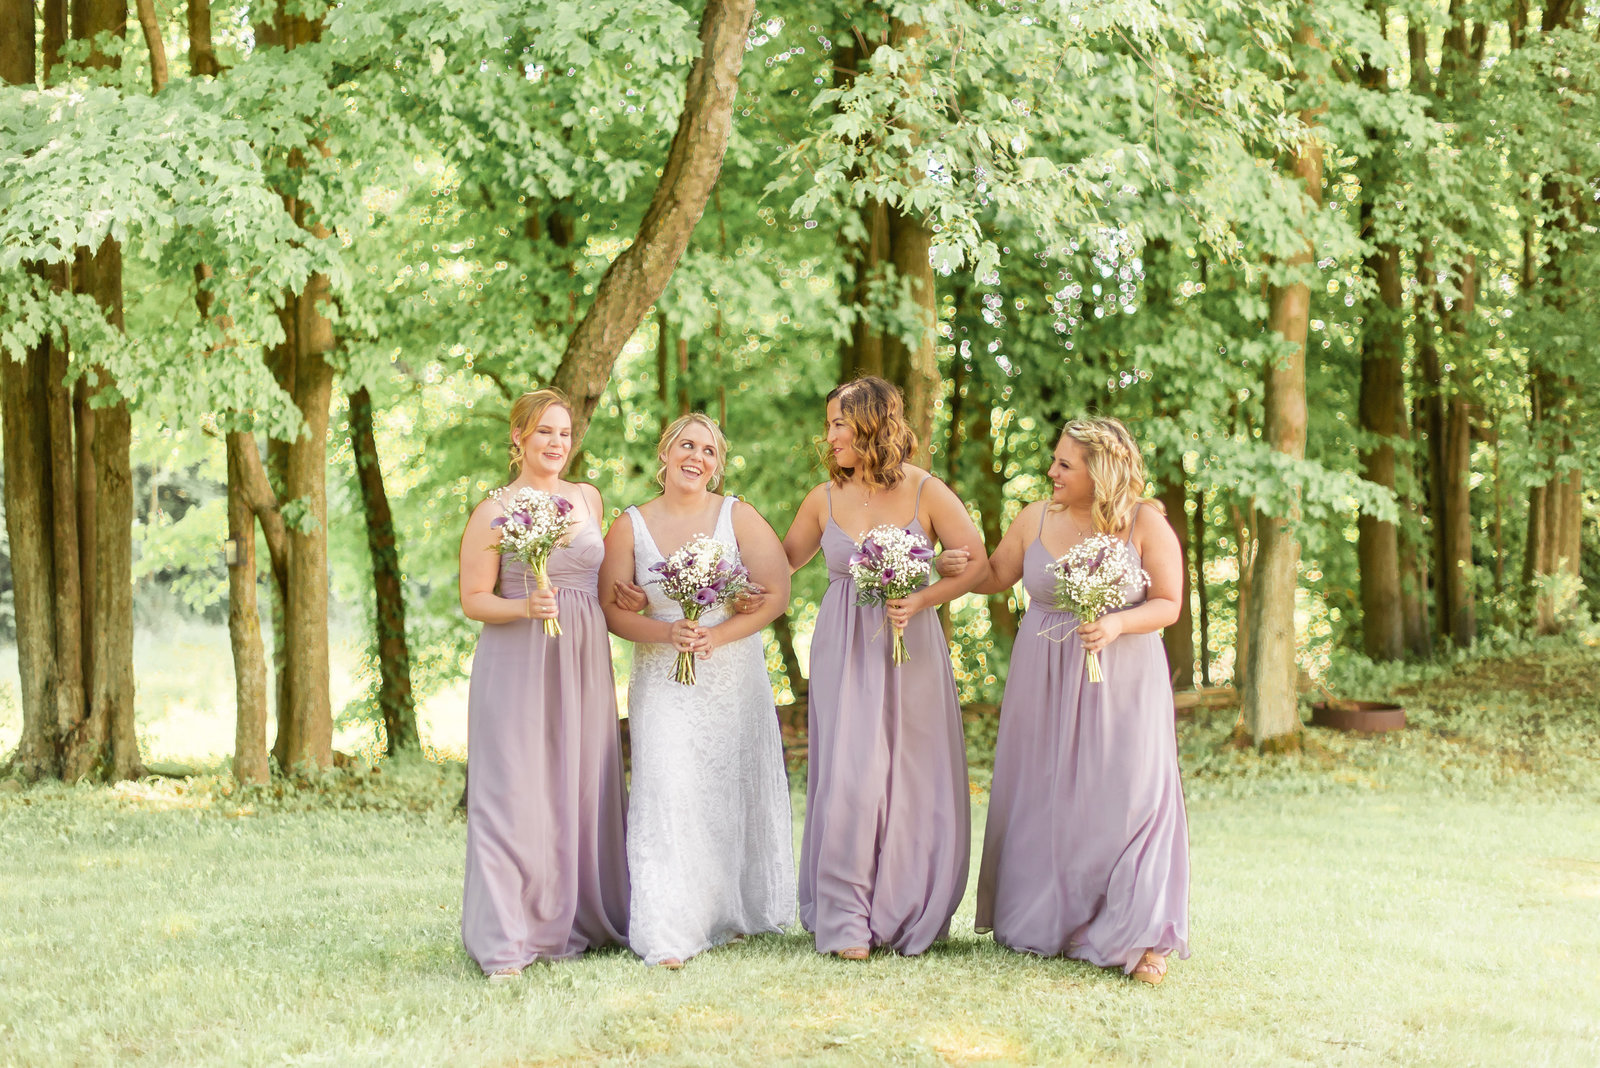 Bridesmaids in lavender dresses walk with the bride